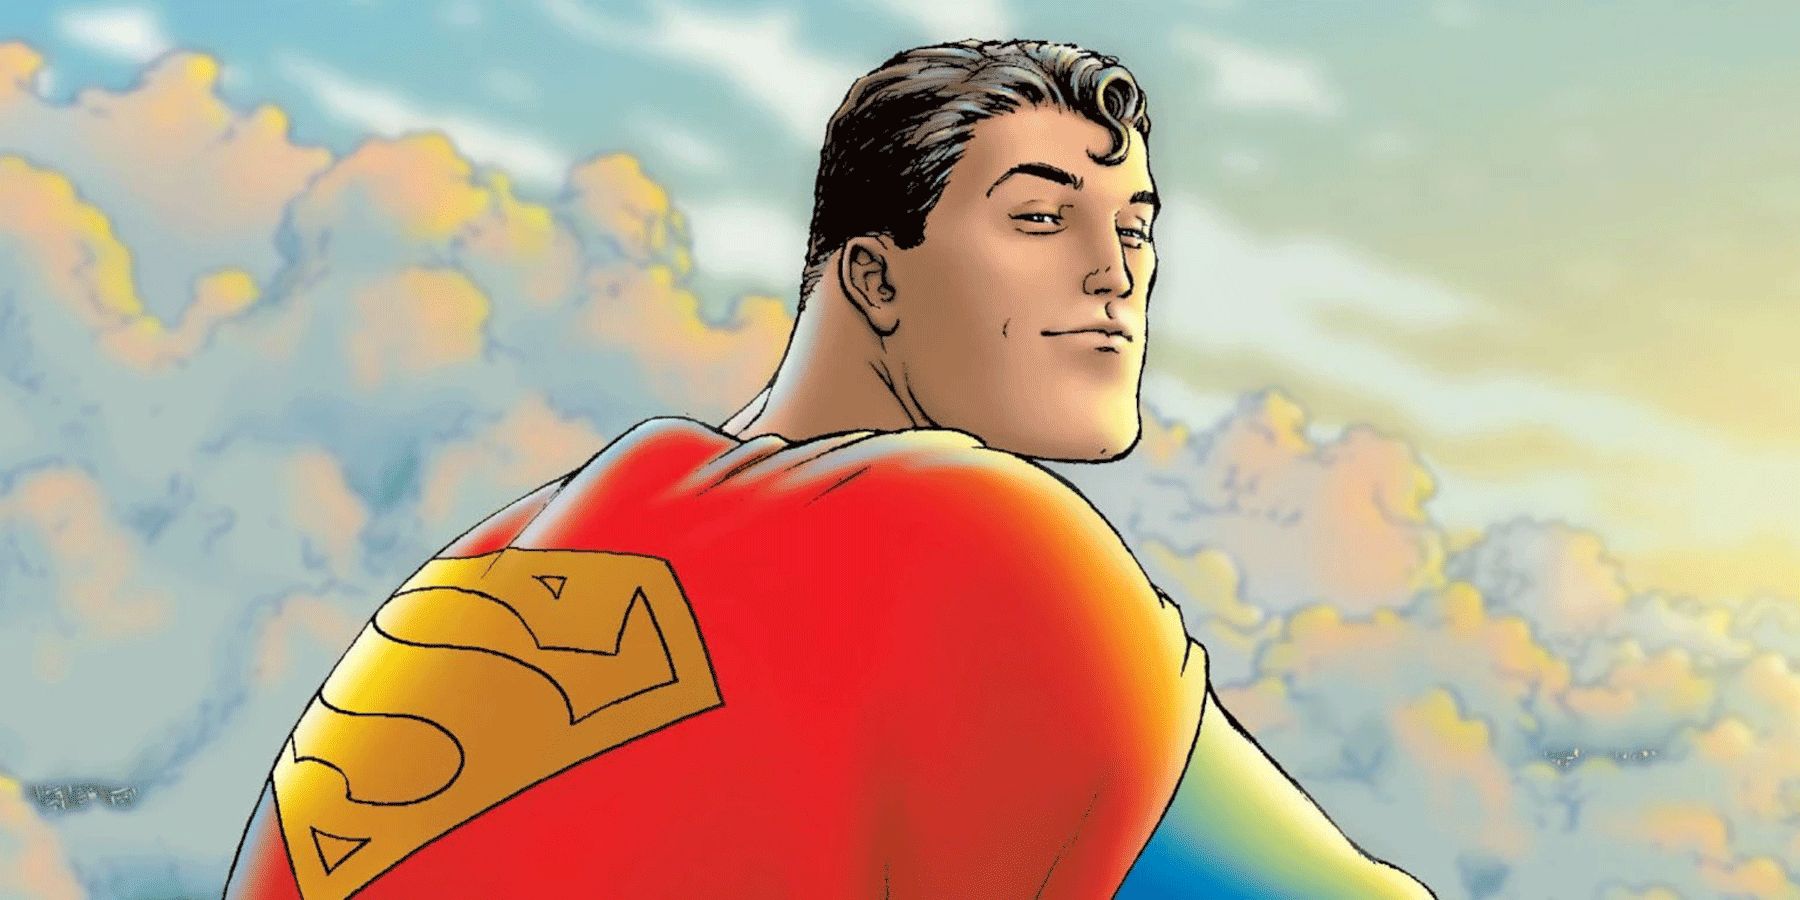 Superman looking content in front of some clouds from All-Star Superman in DC Comics